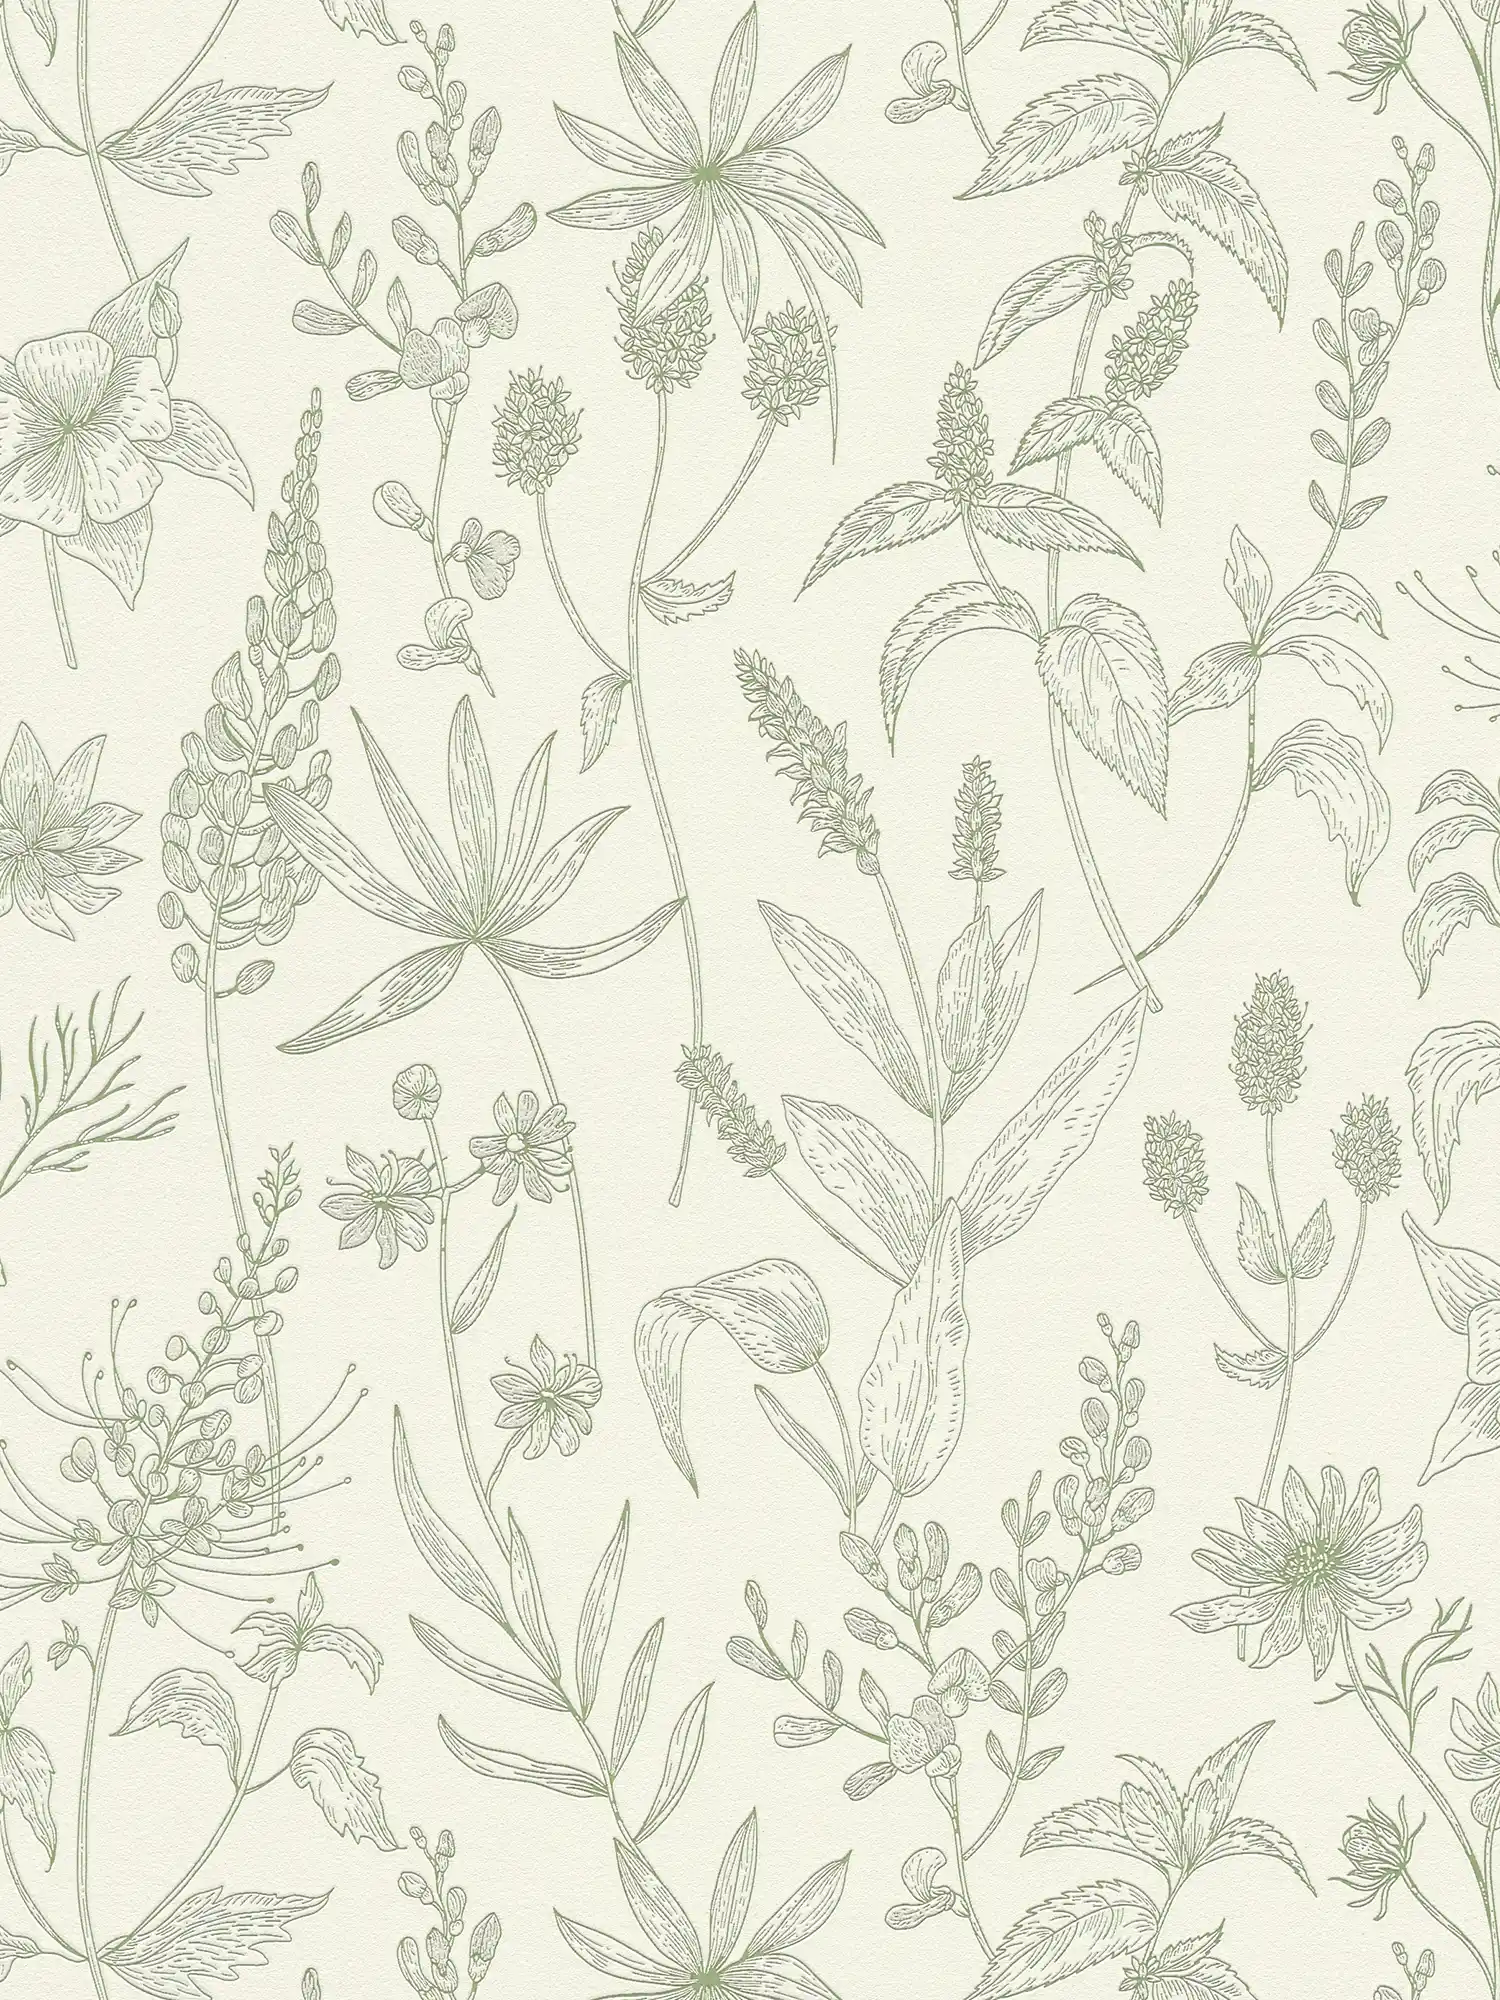 Non-woven wallpaper with floral pattern and metallic accent - green, silver, white
